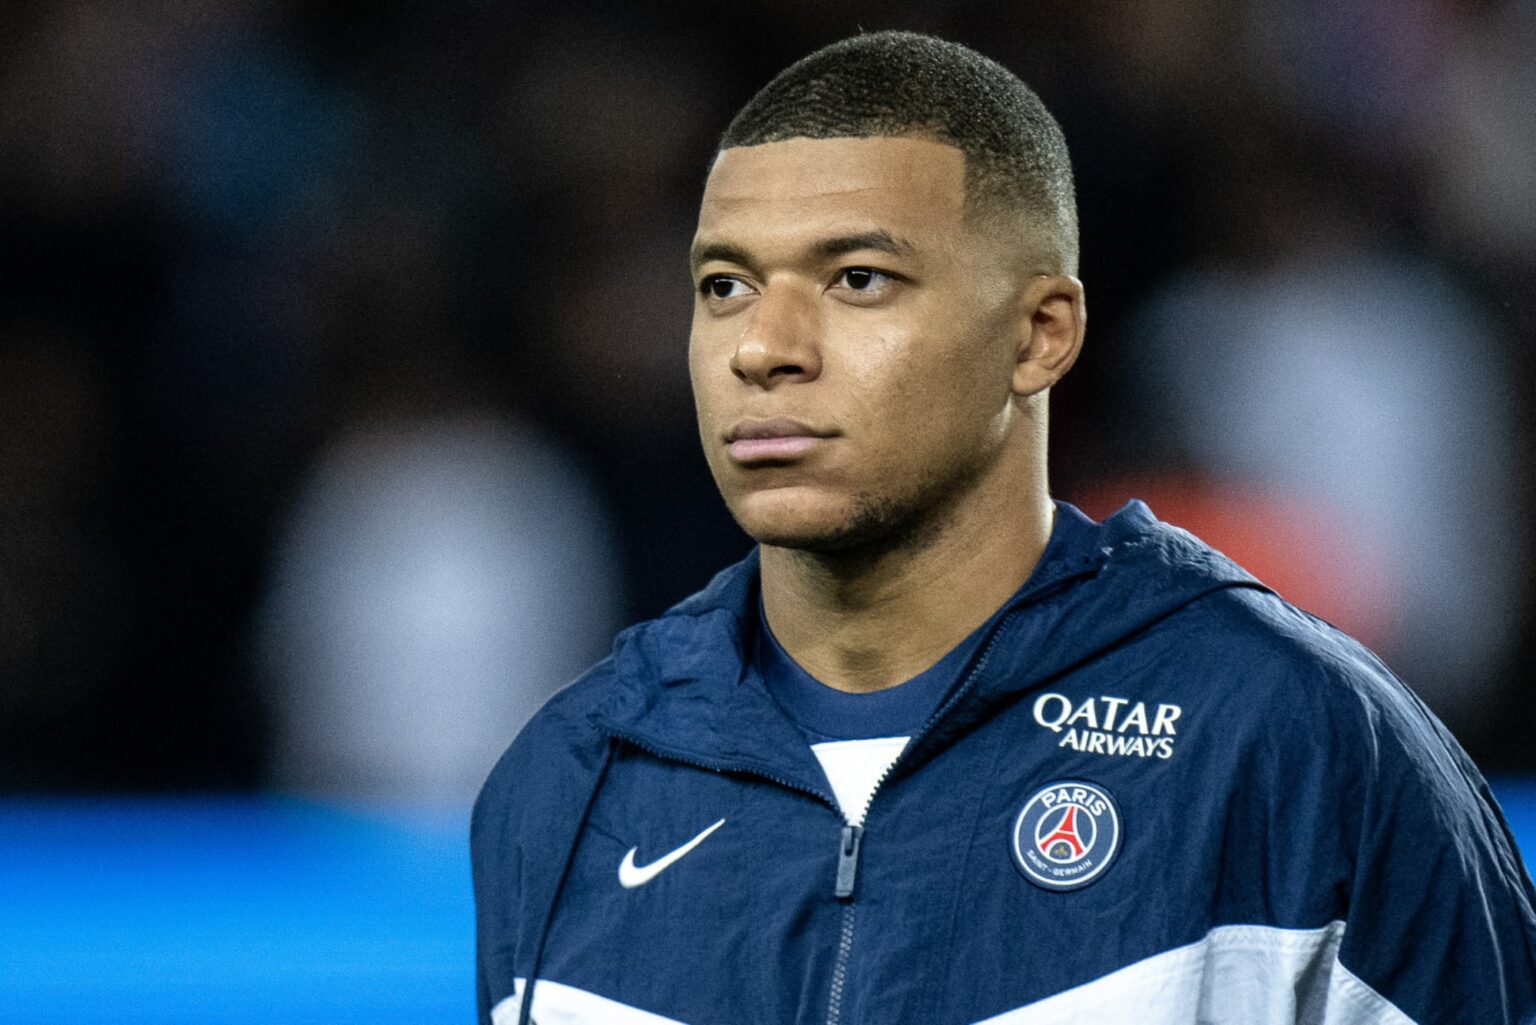 FIFA WORLD CUP 2022: Mbappe is leading the Golden Boot award race - Asiana Times